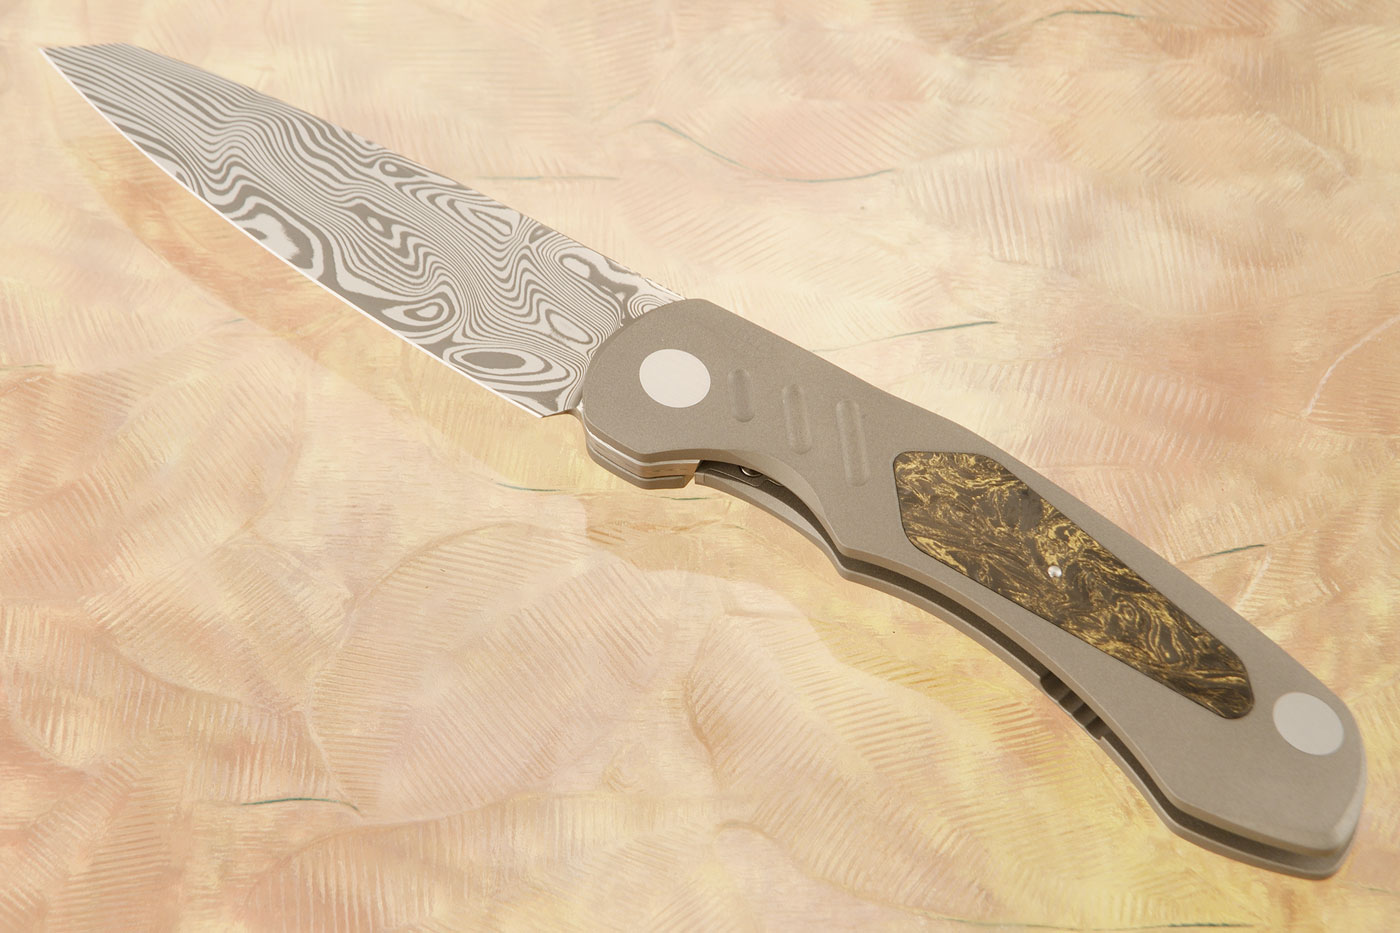 Viper Ex Front Flipper with Damasteel and Gold Dark Matter FatCarbon